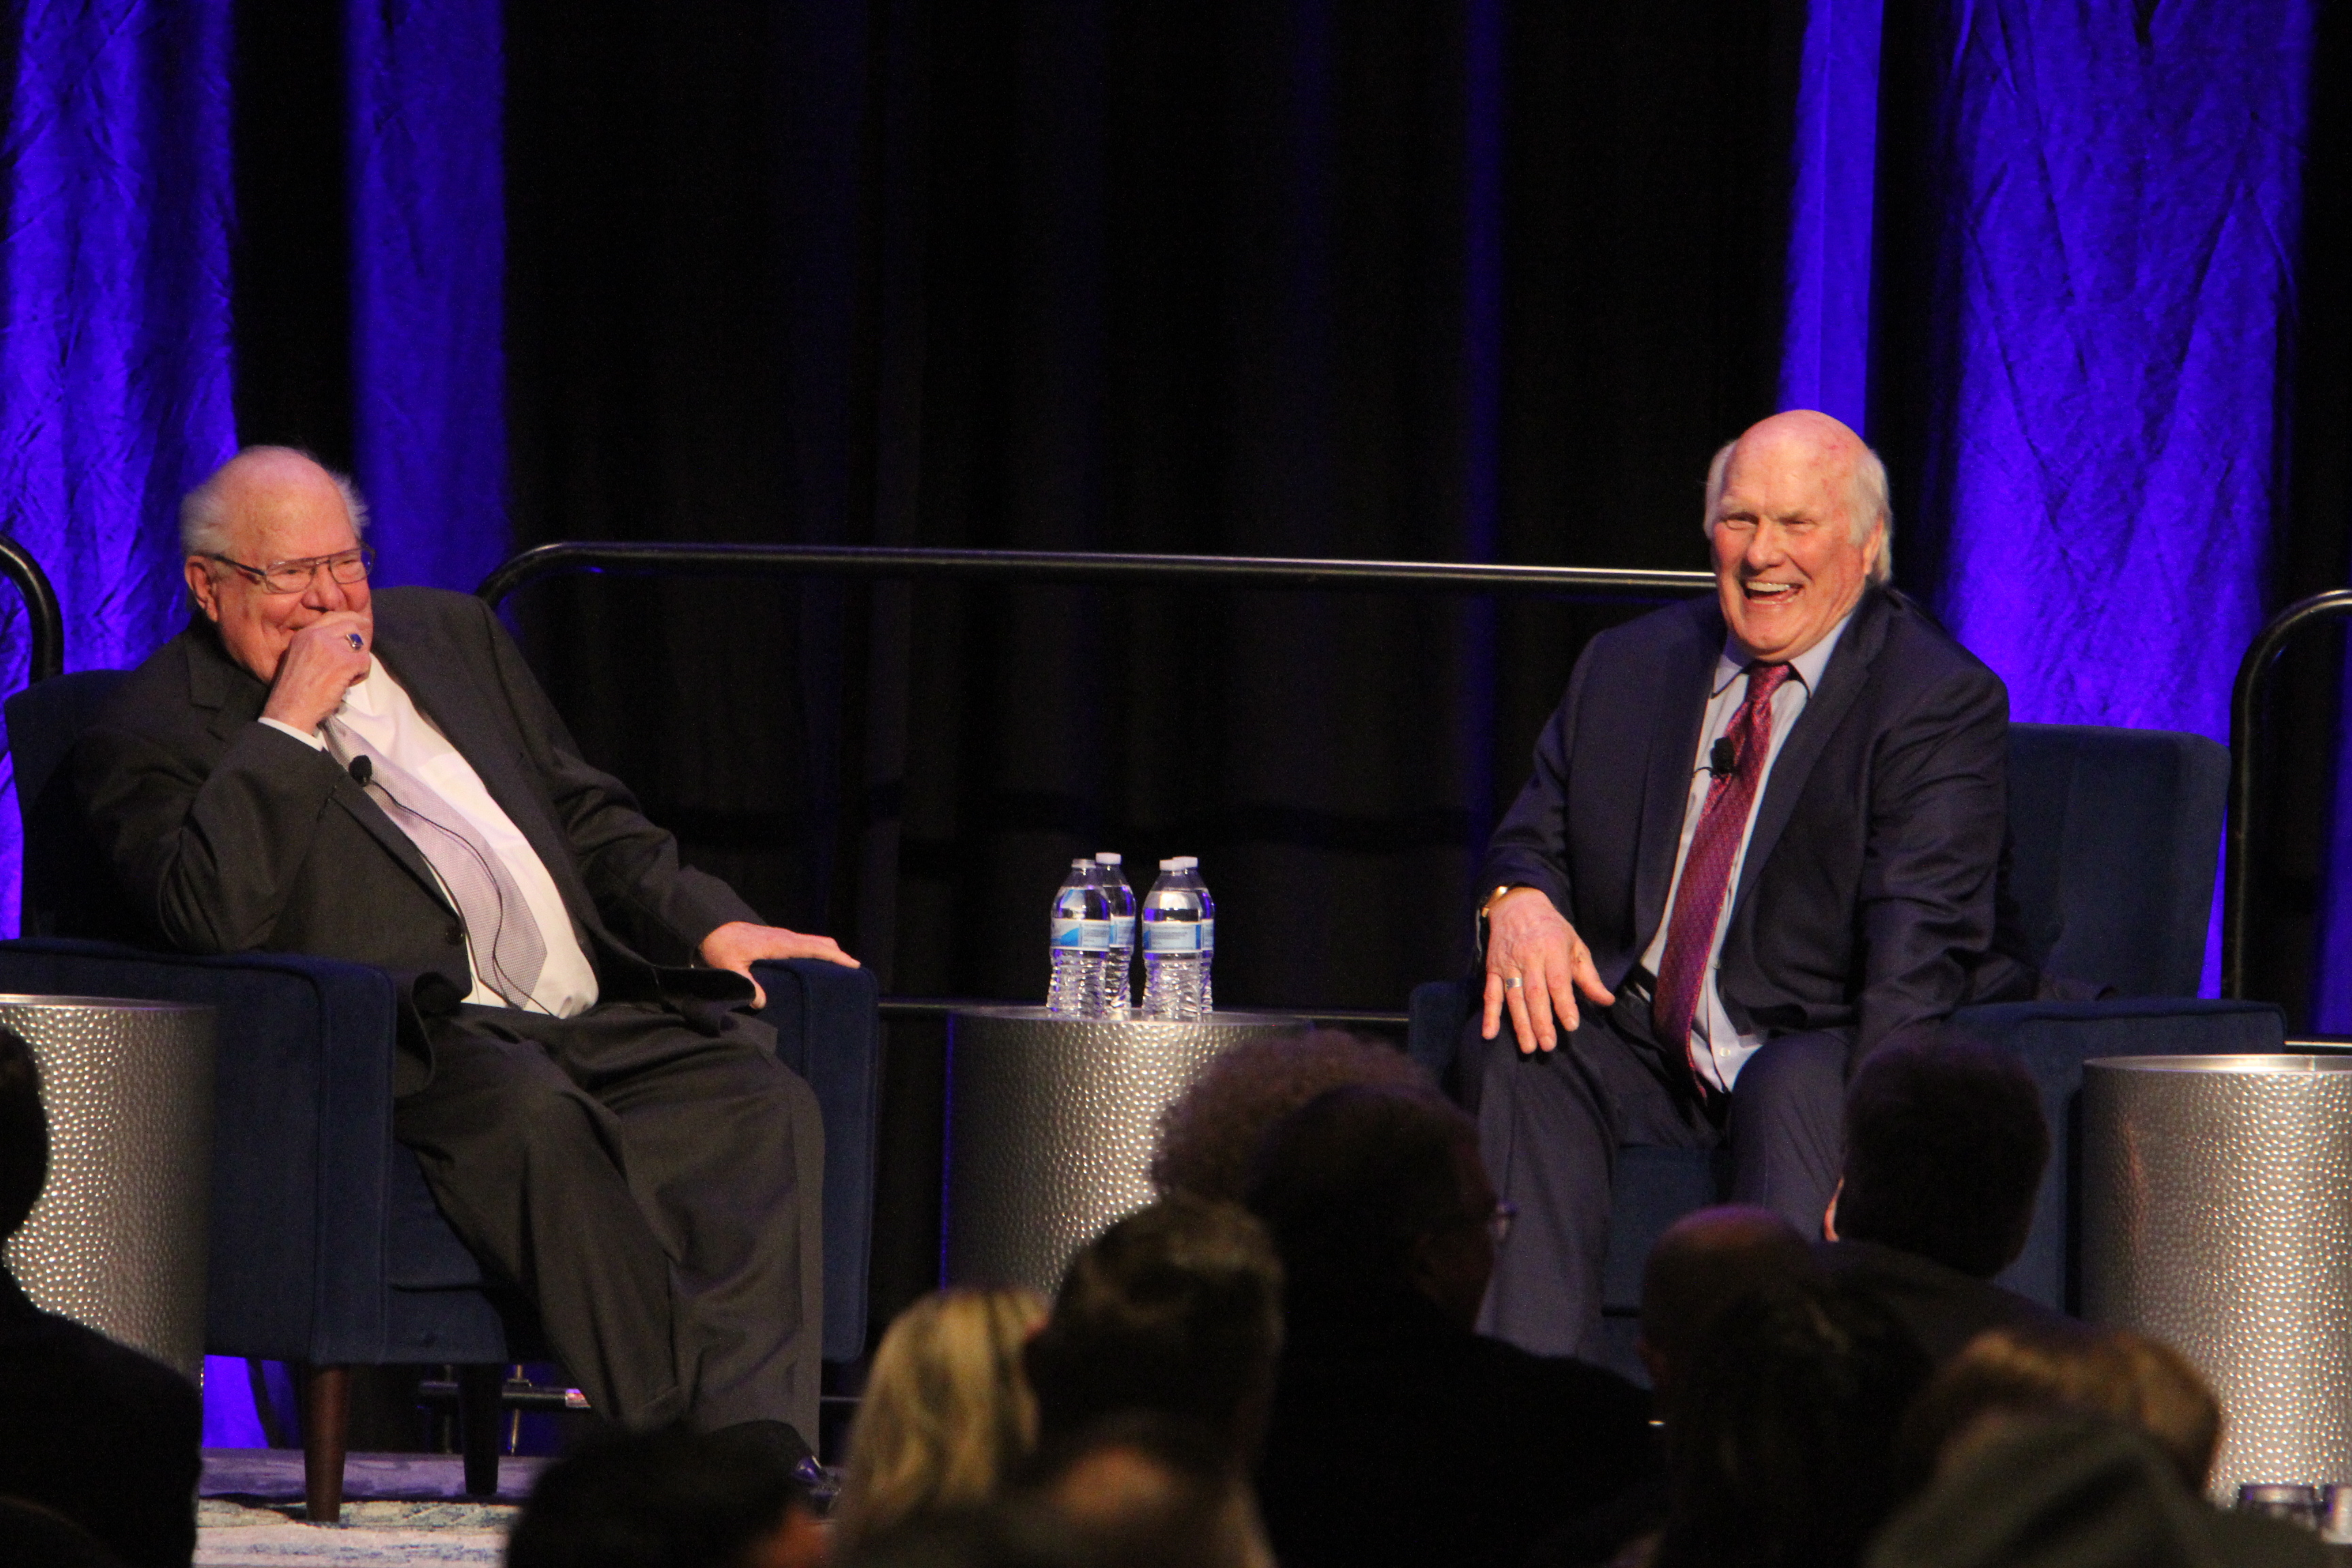 Verne Lundquist and Terry Bradshaw